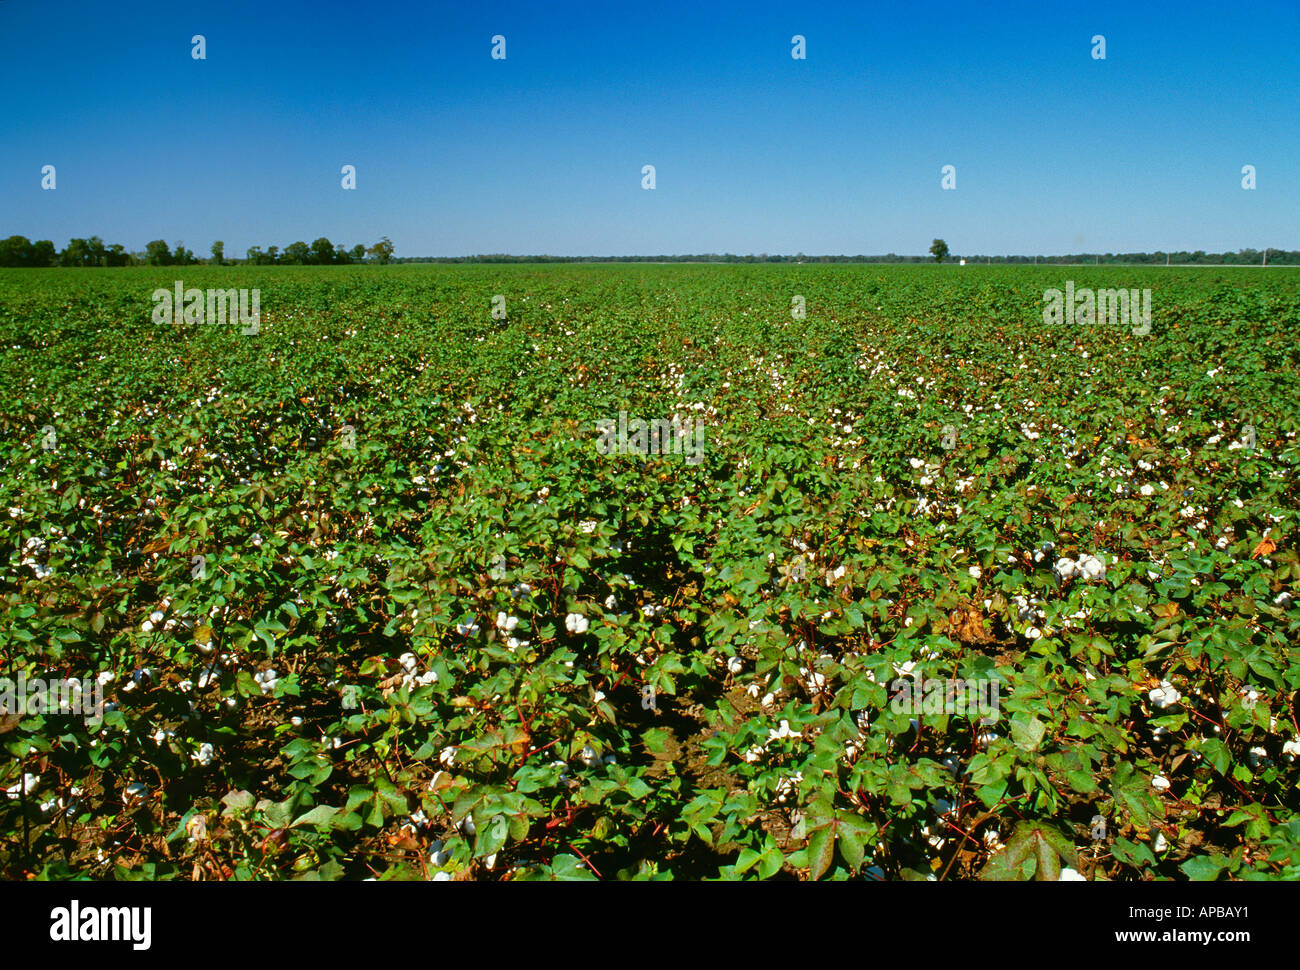 Agriculture - Field of mature cotton with open bolls at the defoliation stage / Mississippi, USA. Stock Photo